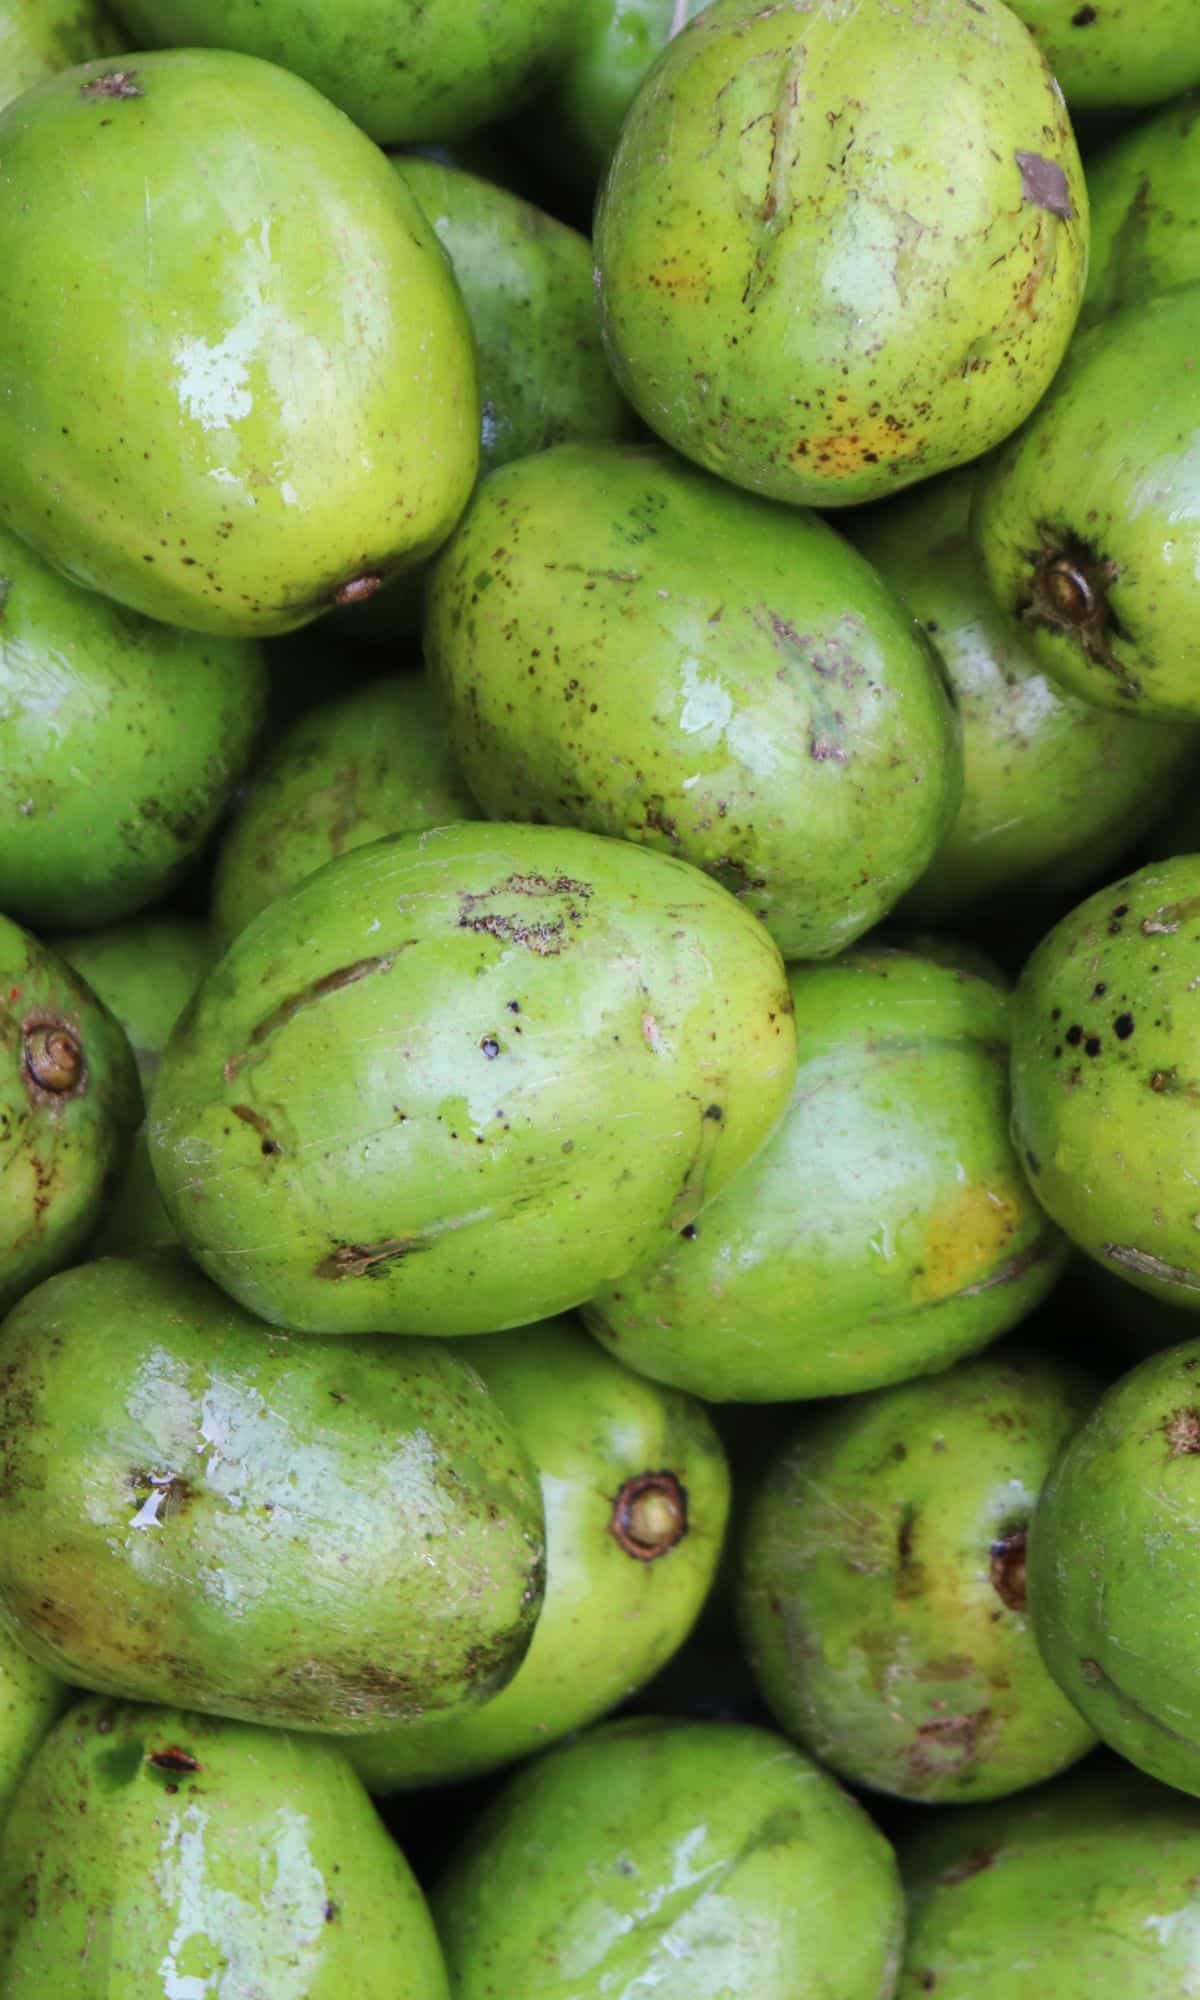 A bunch of green Nepali Hog Plum fruits in a pile.